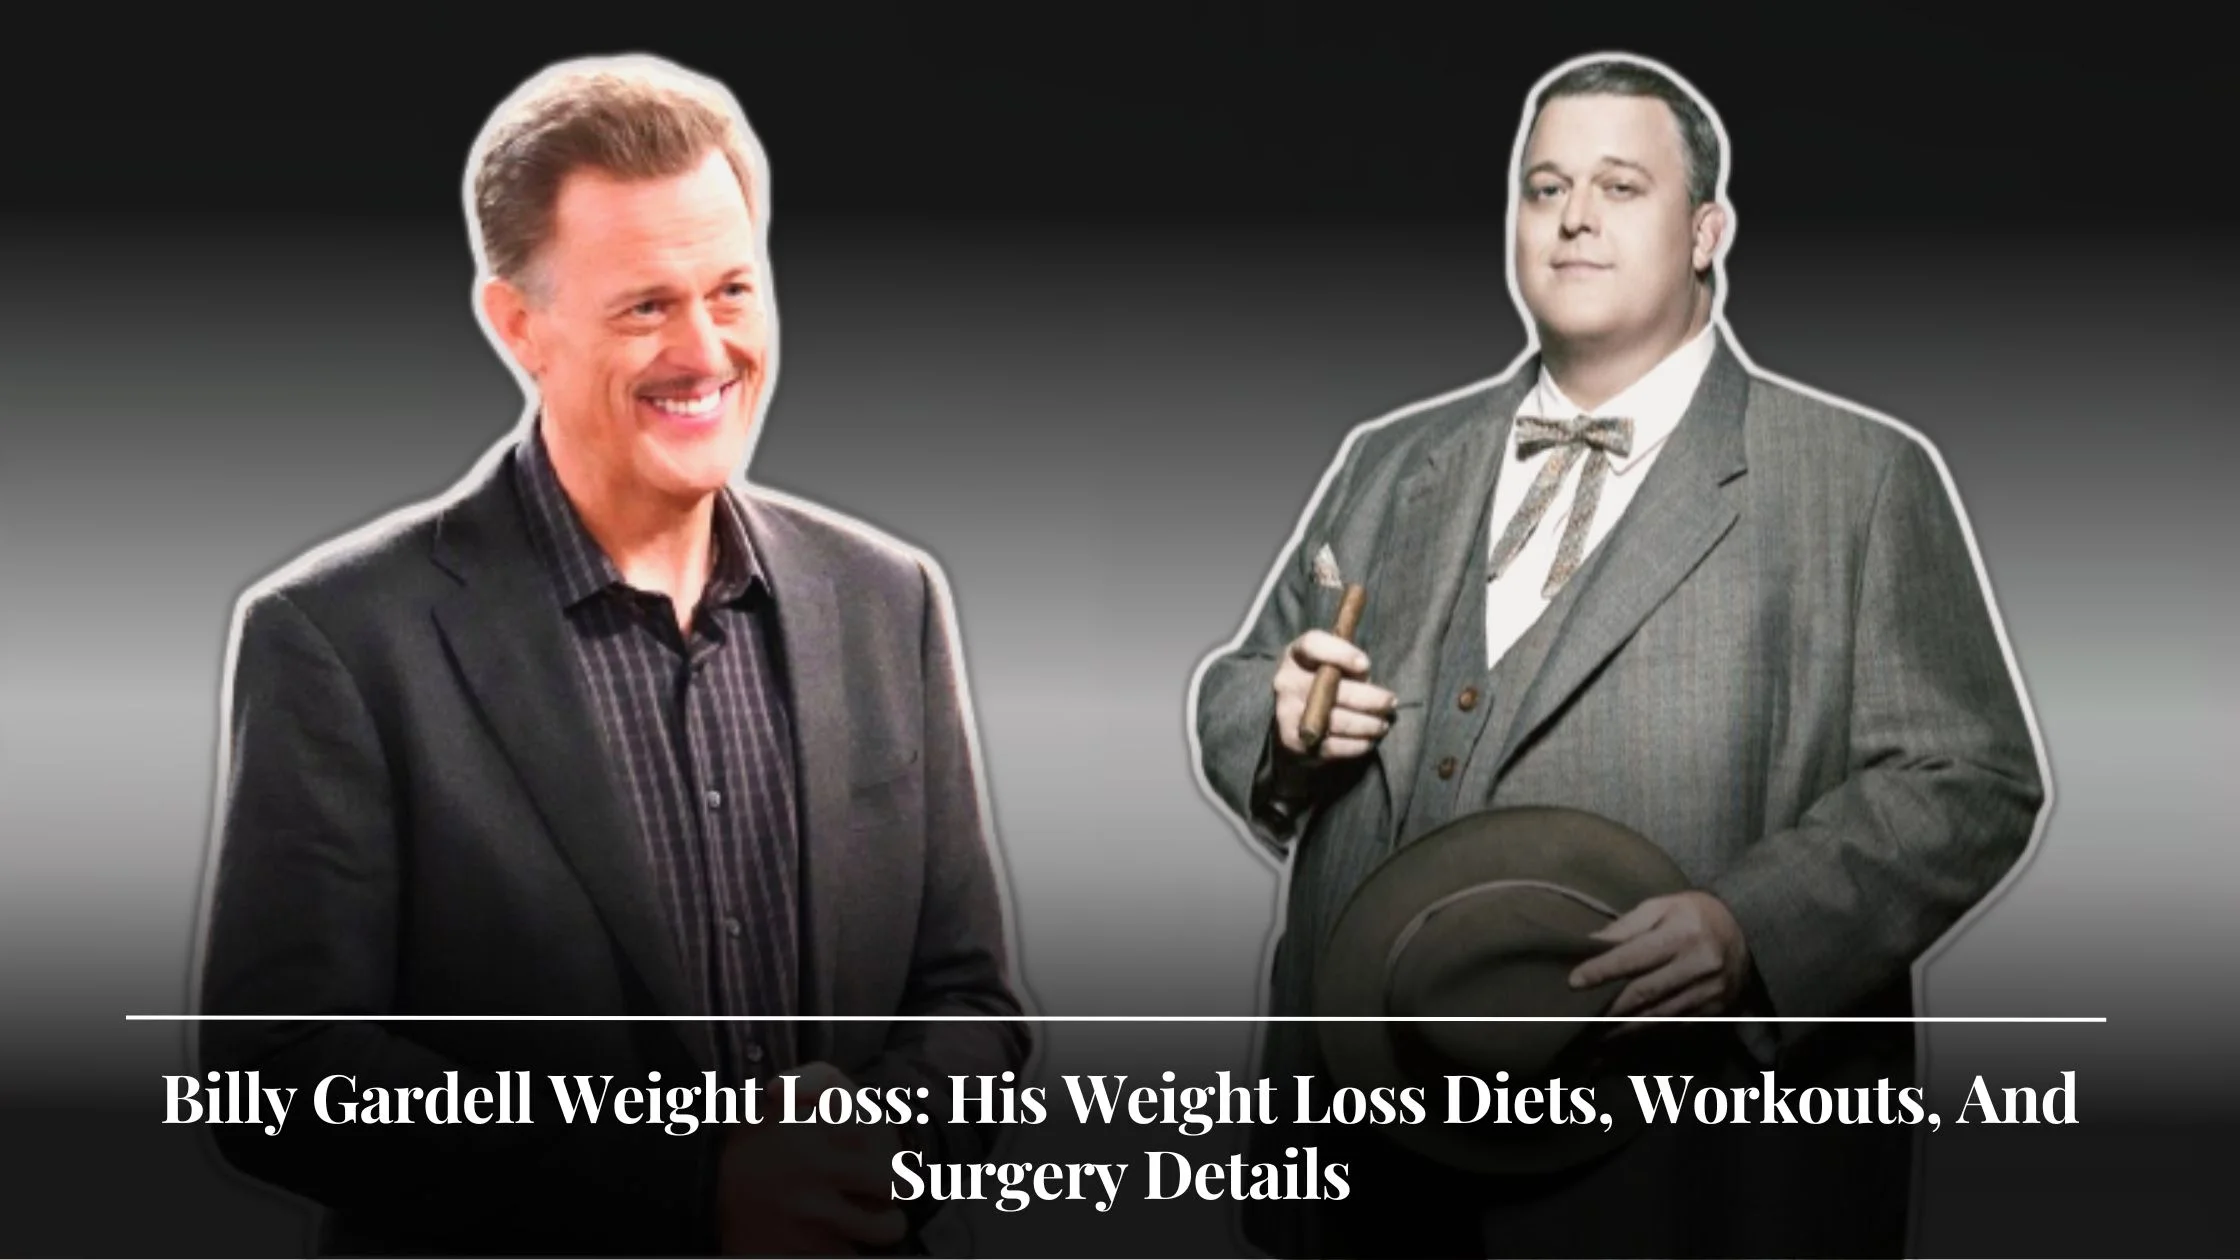 Billy Gardell Weight Loss His Weight Loss Diets, Workouts, And Surgery Details